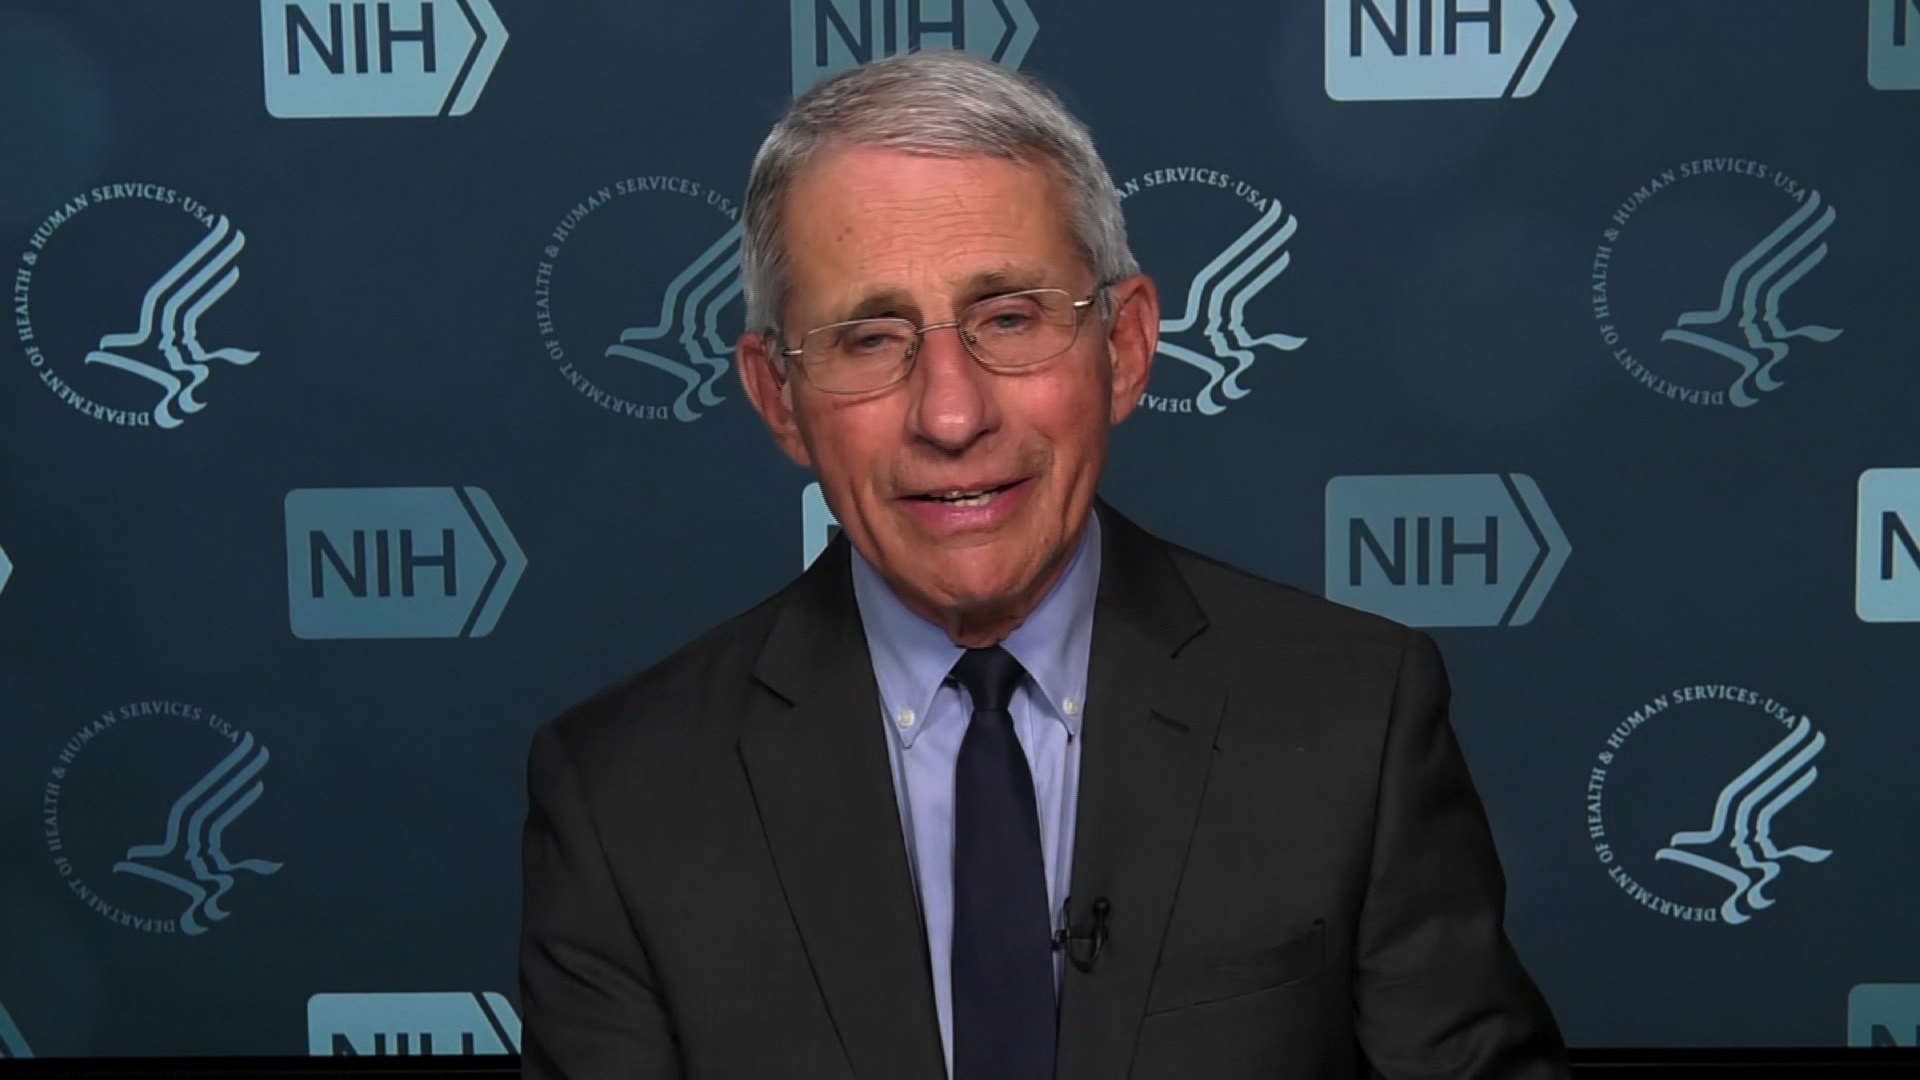 Dr. Anthony Fauci: "There are no proven safe and effective therapies for the coronavirus"